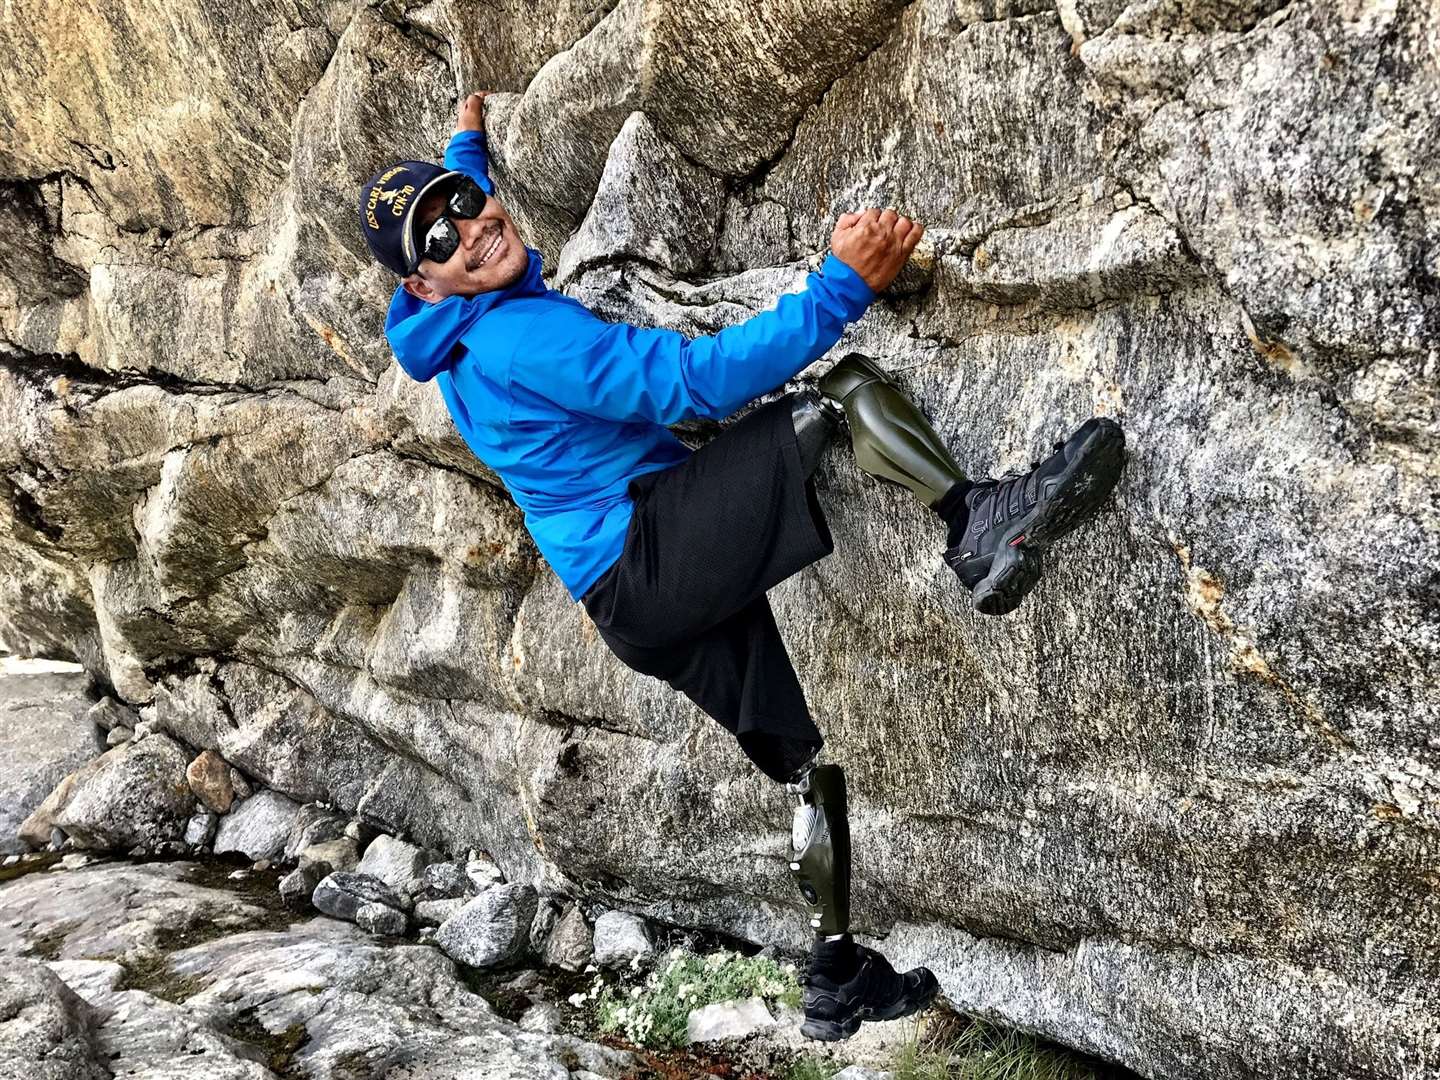 Hari Budha Magar, who lives in Canterbury, hopes to become the world's first double above-the-knee amputee to climb Everest. Photo: HST Adventures